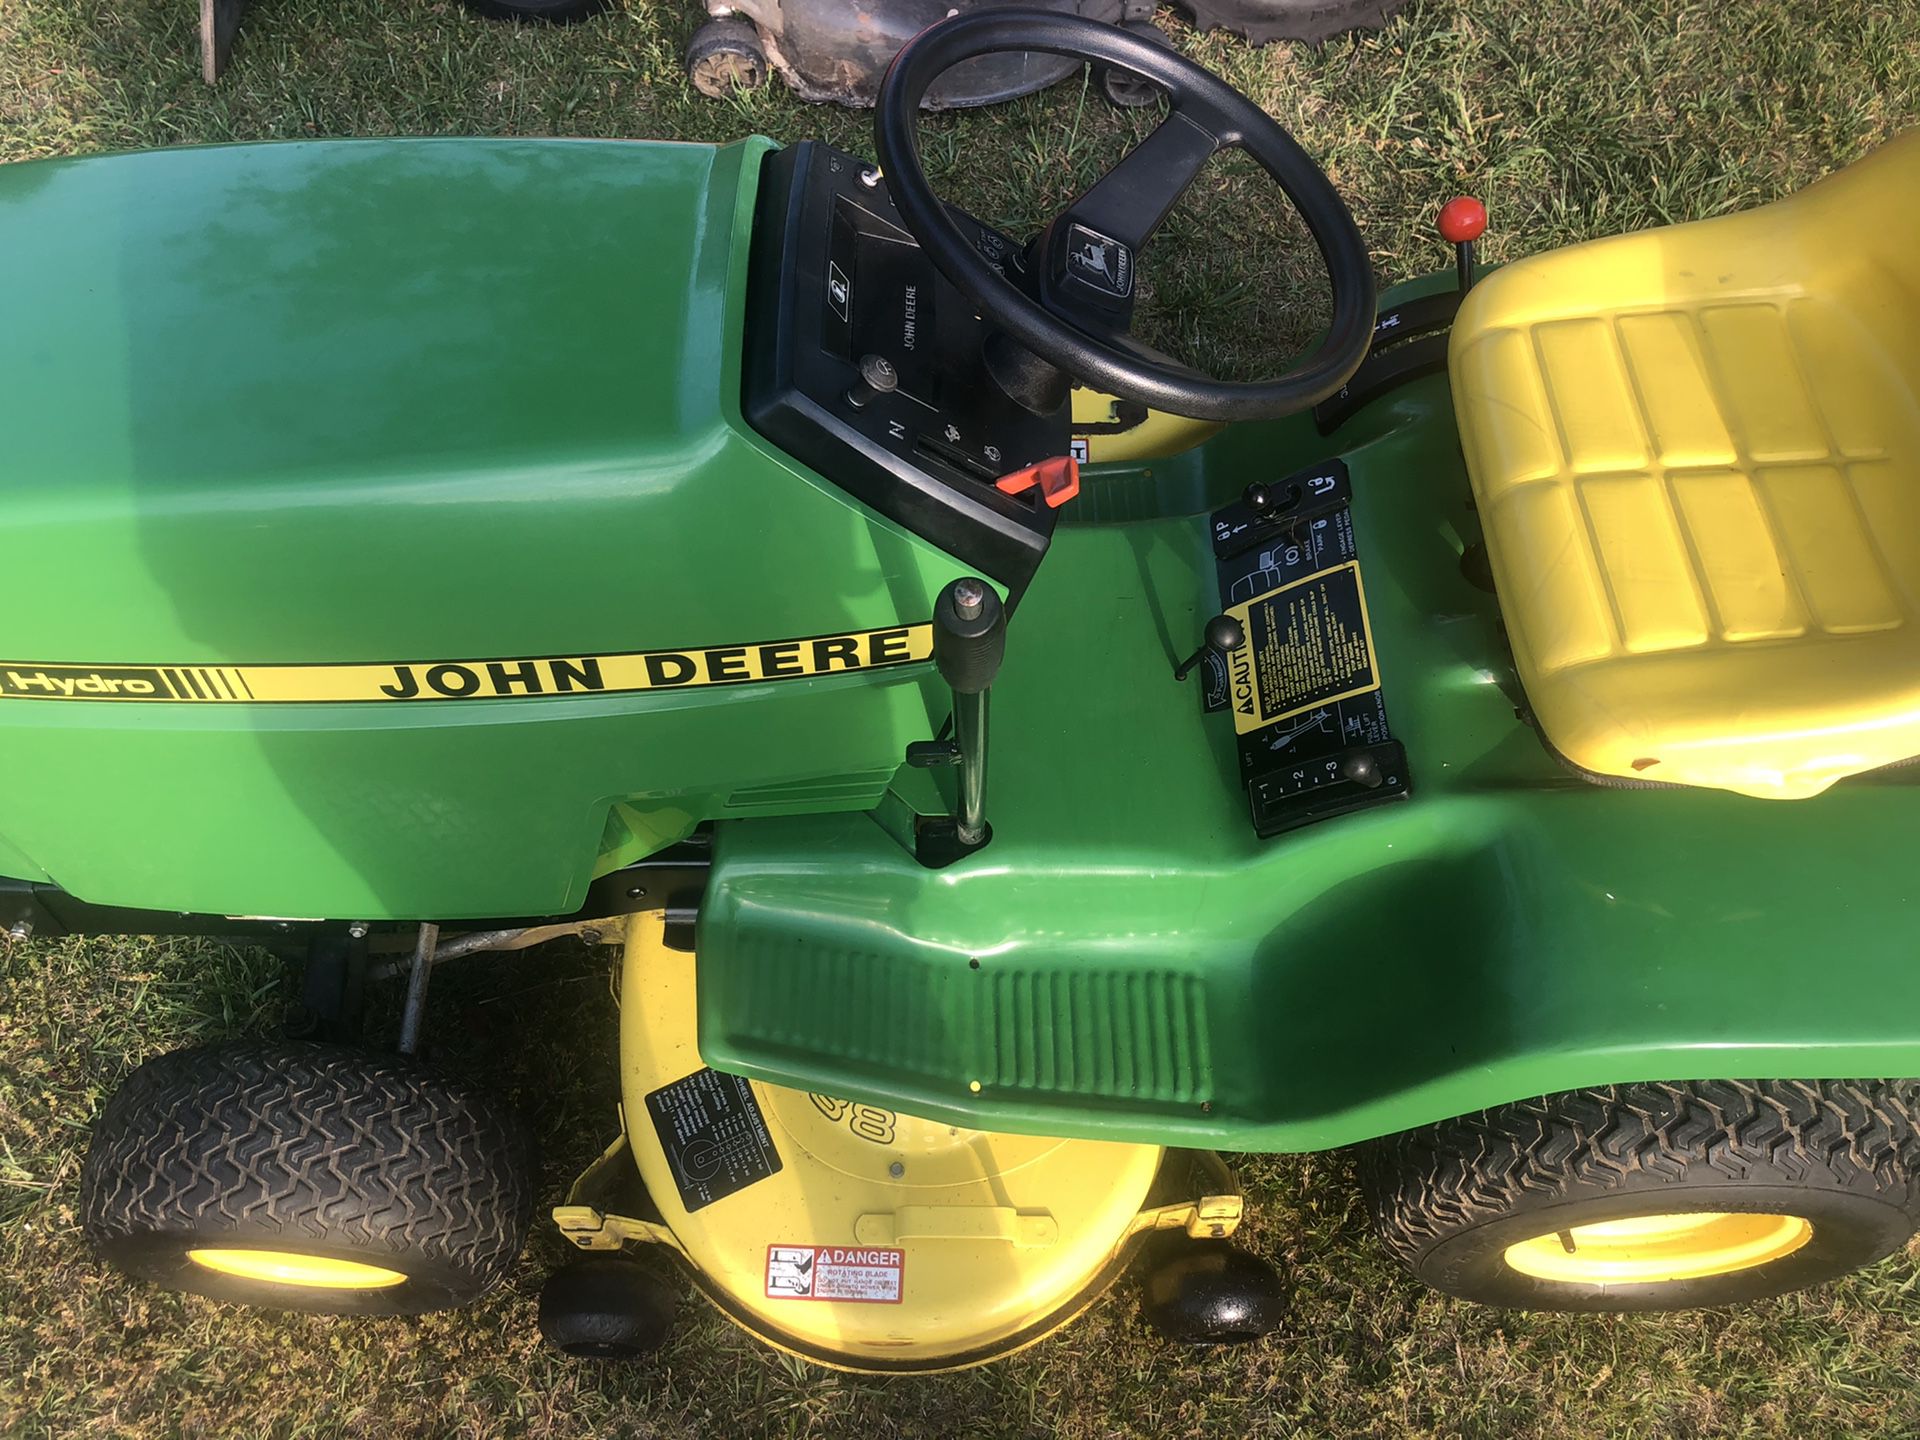 John Deere hydro 175 lawn mower in perfect condition